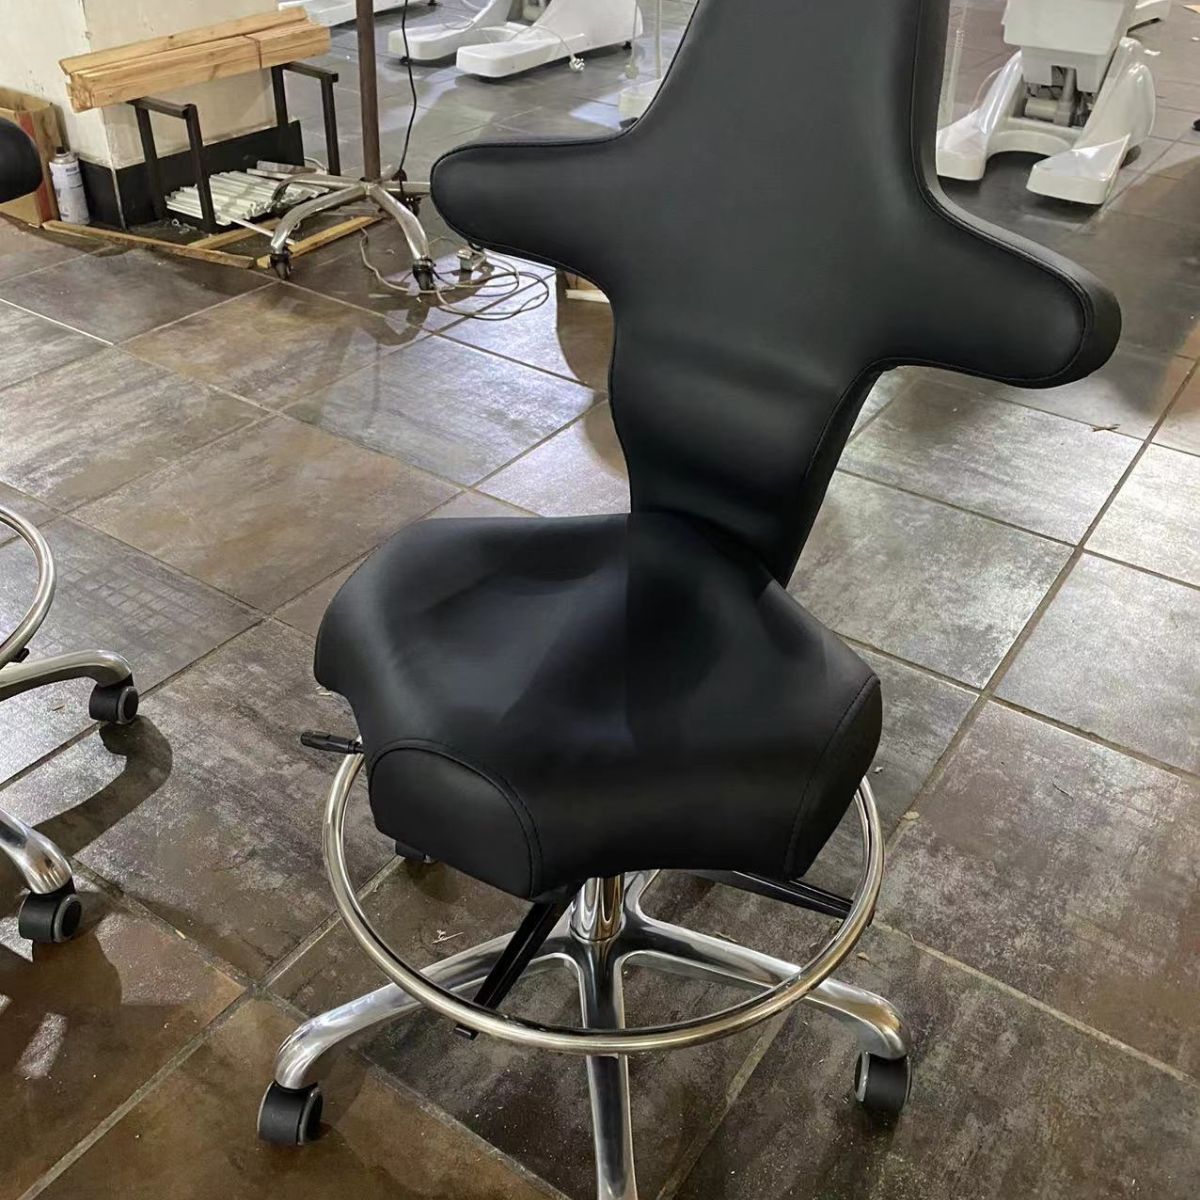 Ergonomic Surgeon Chair with FootRest for Precision Surgical and Dental Work | Sit Healthier